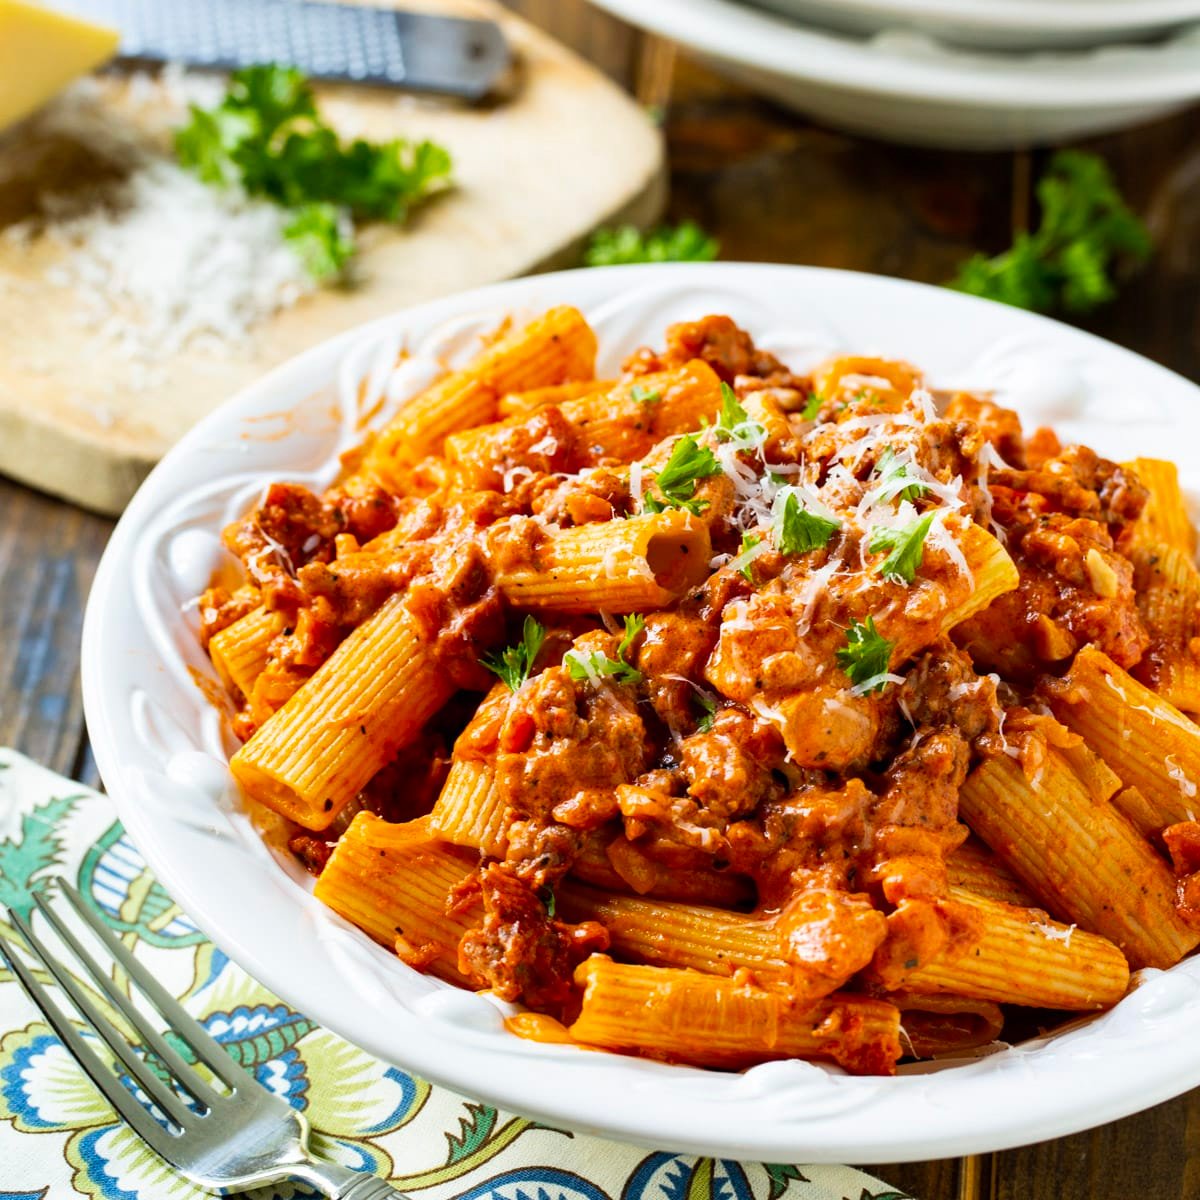 Italian Sausage Rigatoni with Spicy Cream Sauce in a bowl.